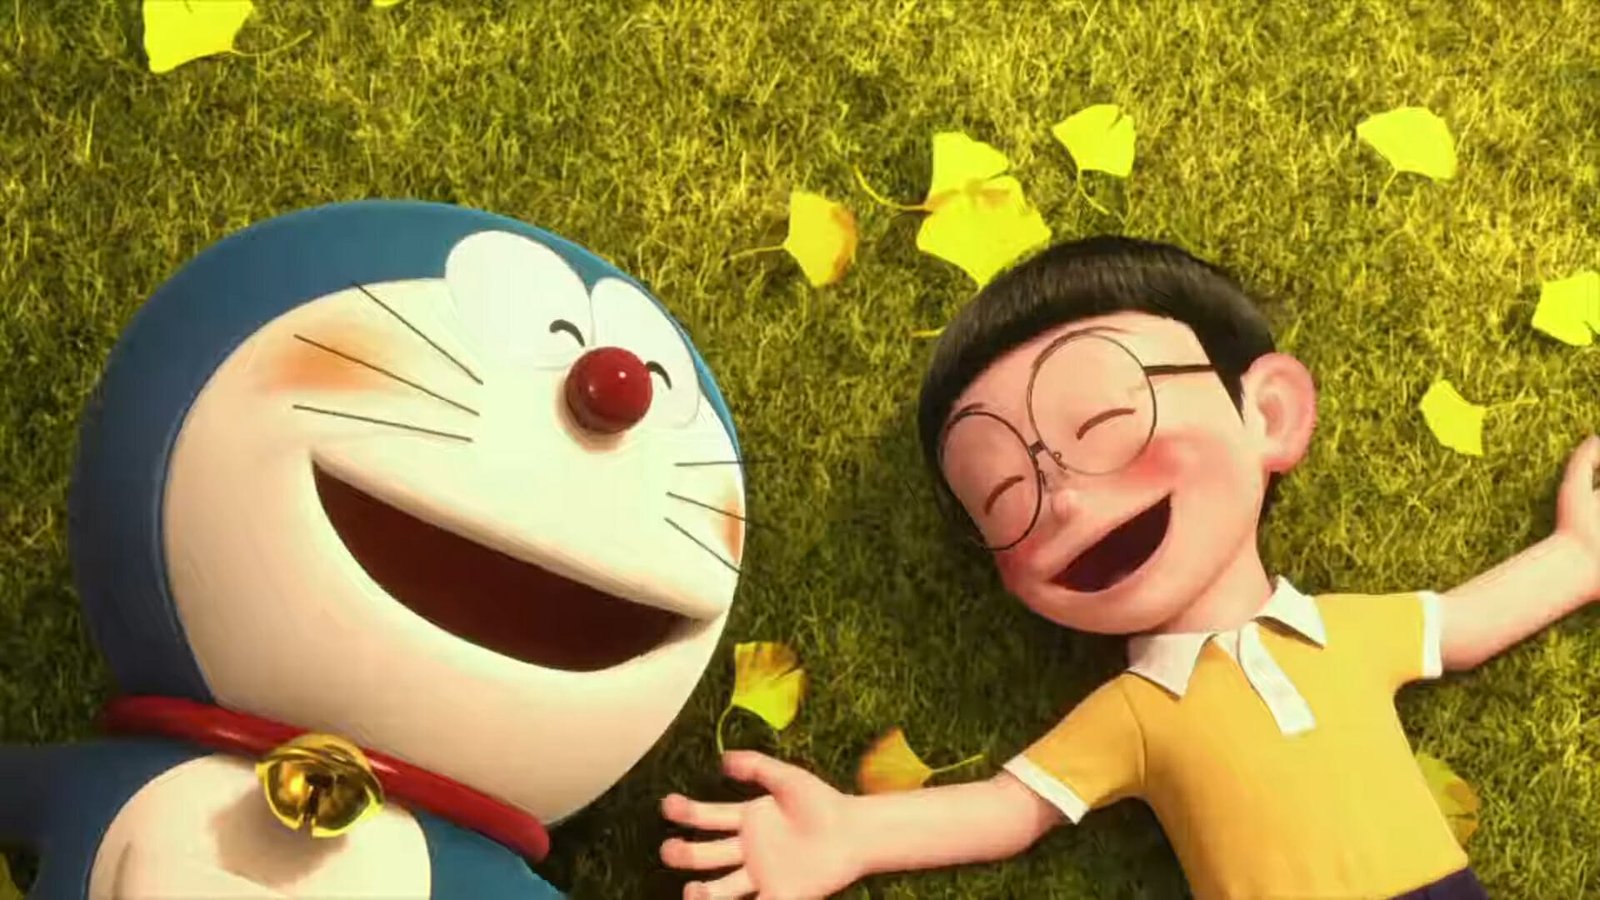 Old Anime: Stand by me Doraemon (2014)